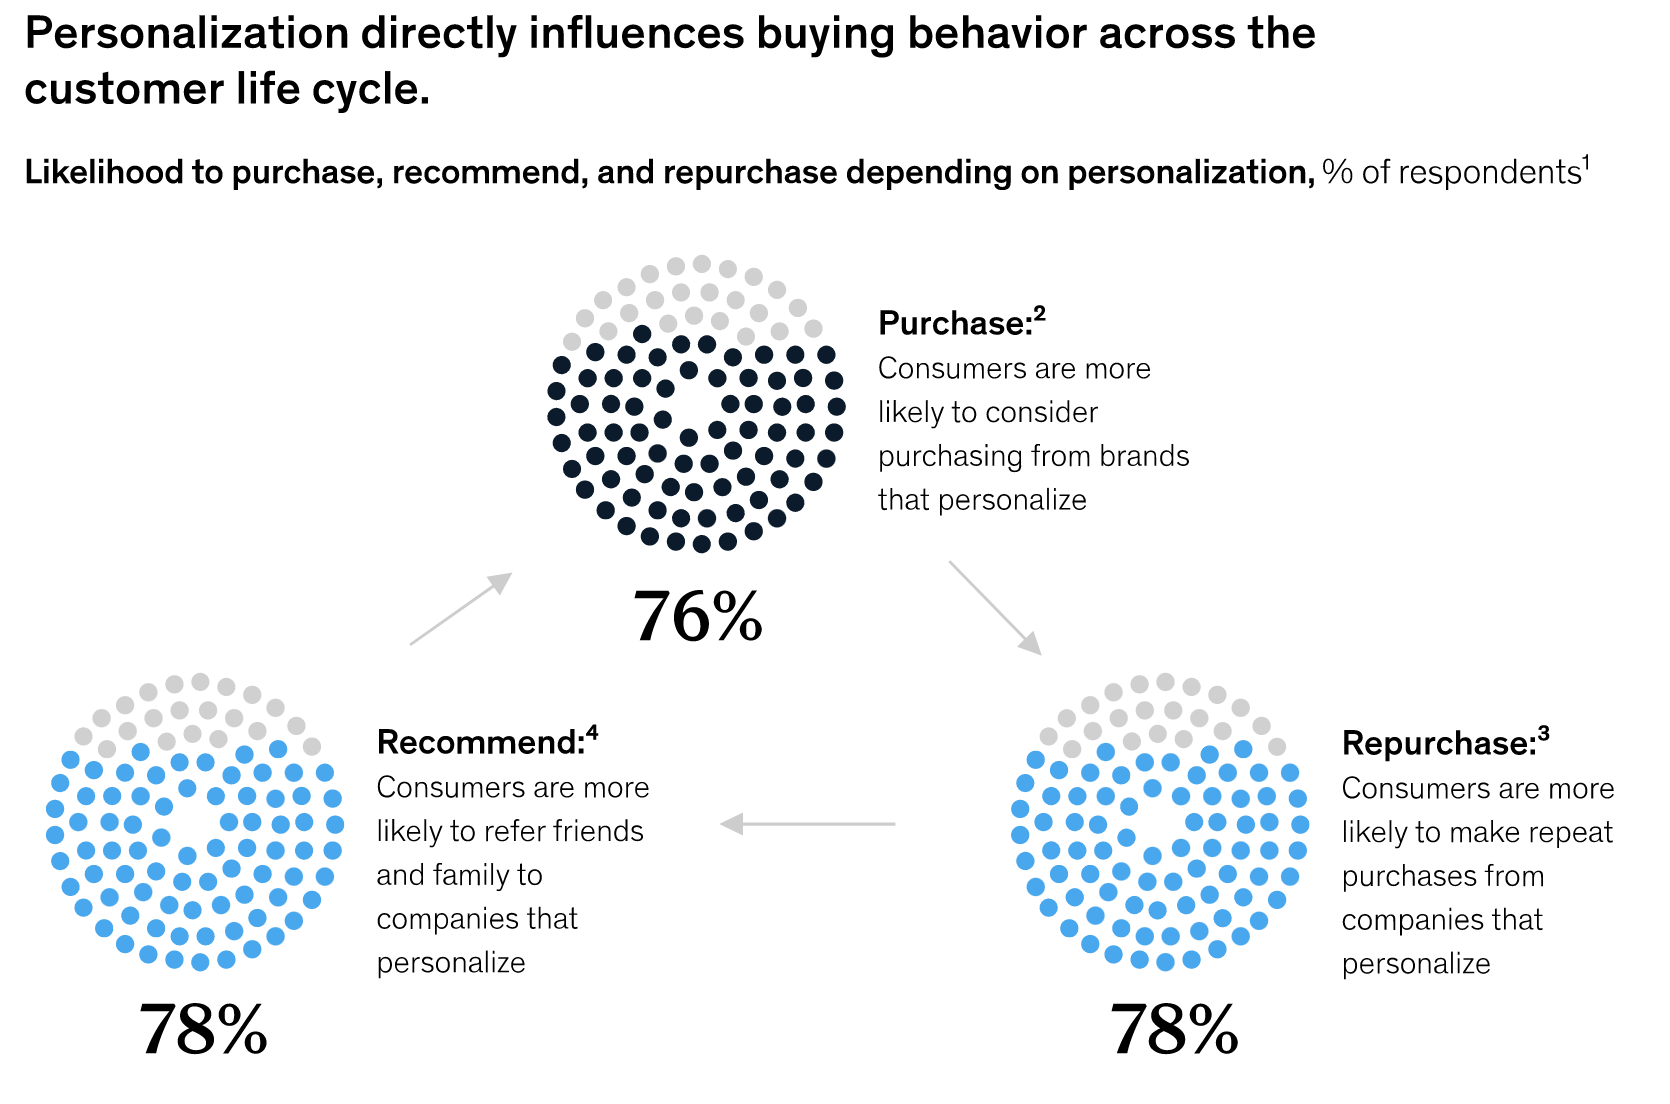 Consumers reward brands that get personalization right